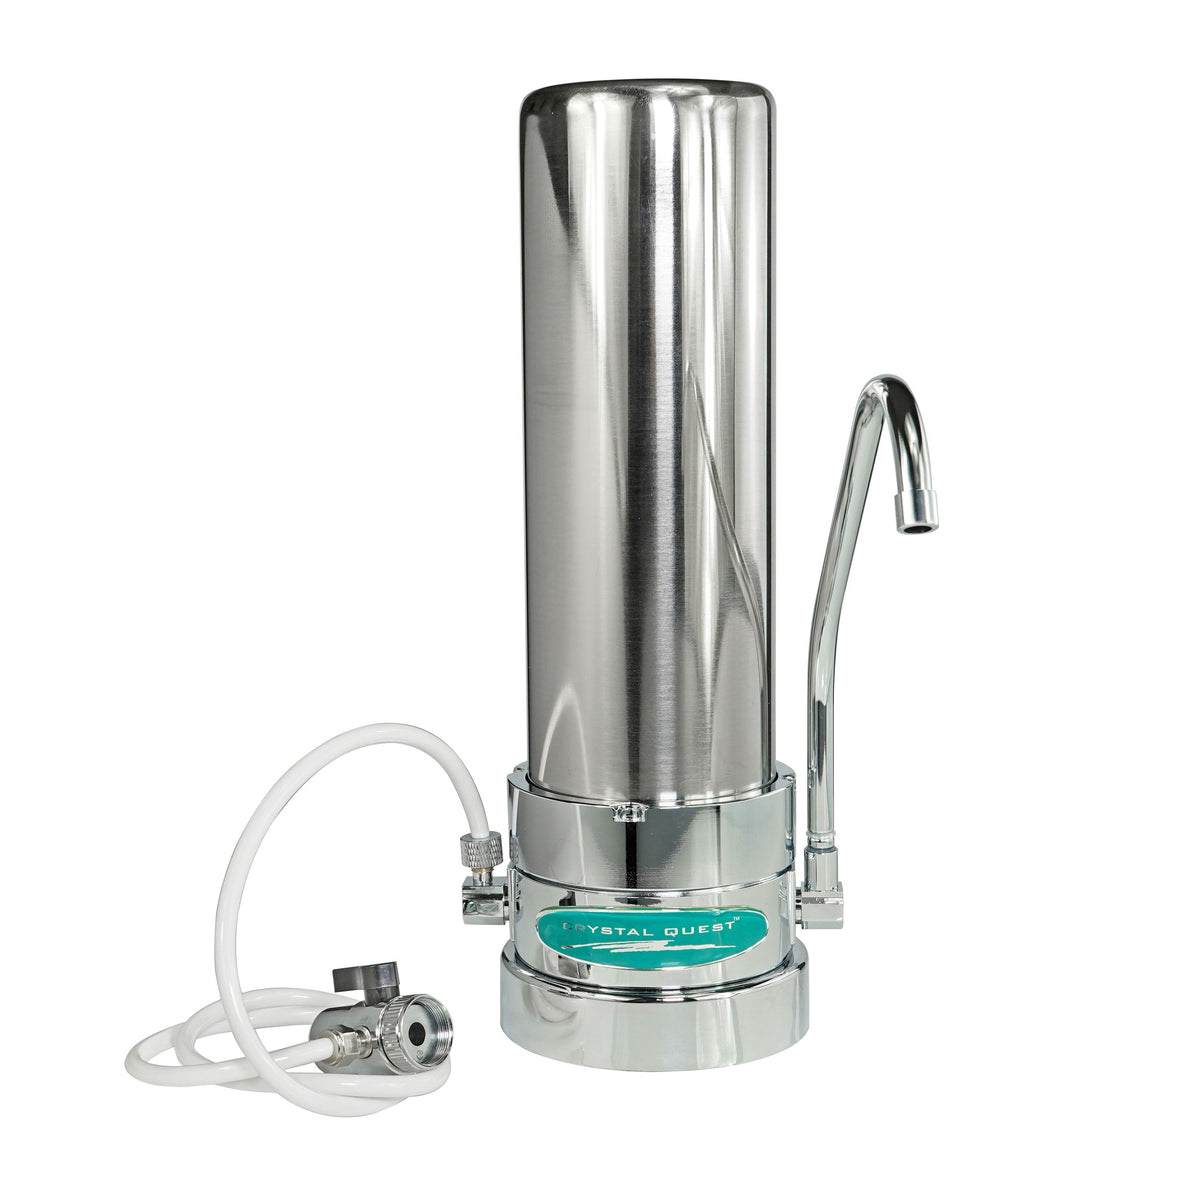 Stainless Steel Fluoride Removal | SMART Single Cartridge Countertop Water Filter System - Countertop Water Filters - Crystal Quest